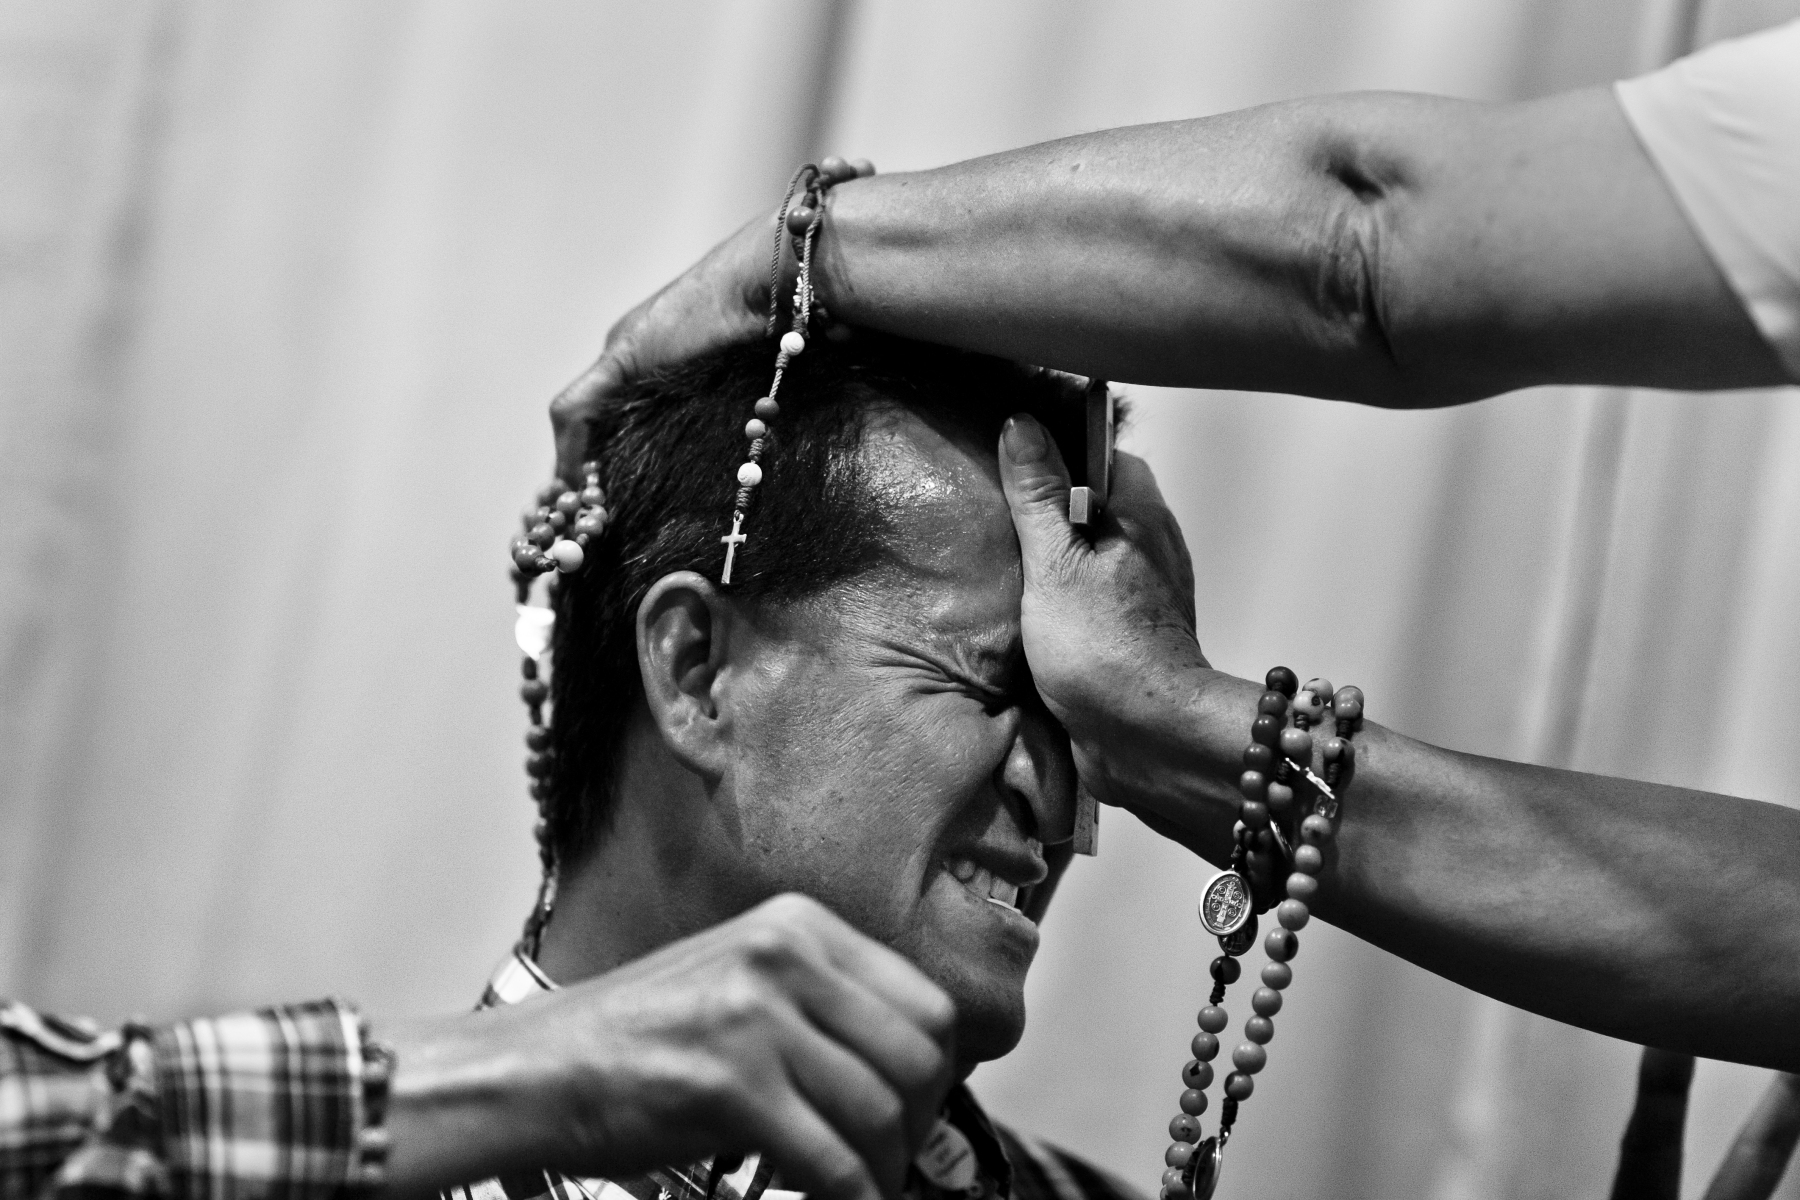 Exorcism and Urban Religious Rituals in Colombia